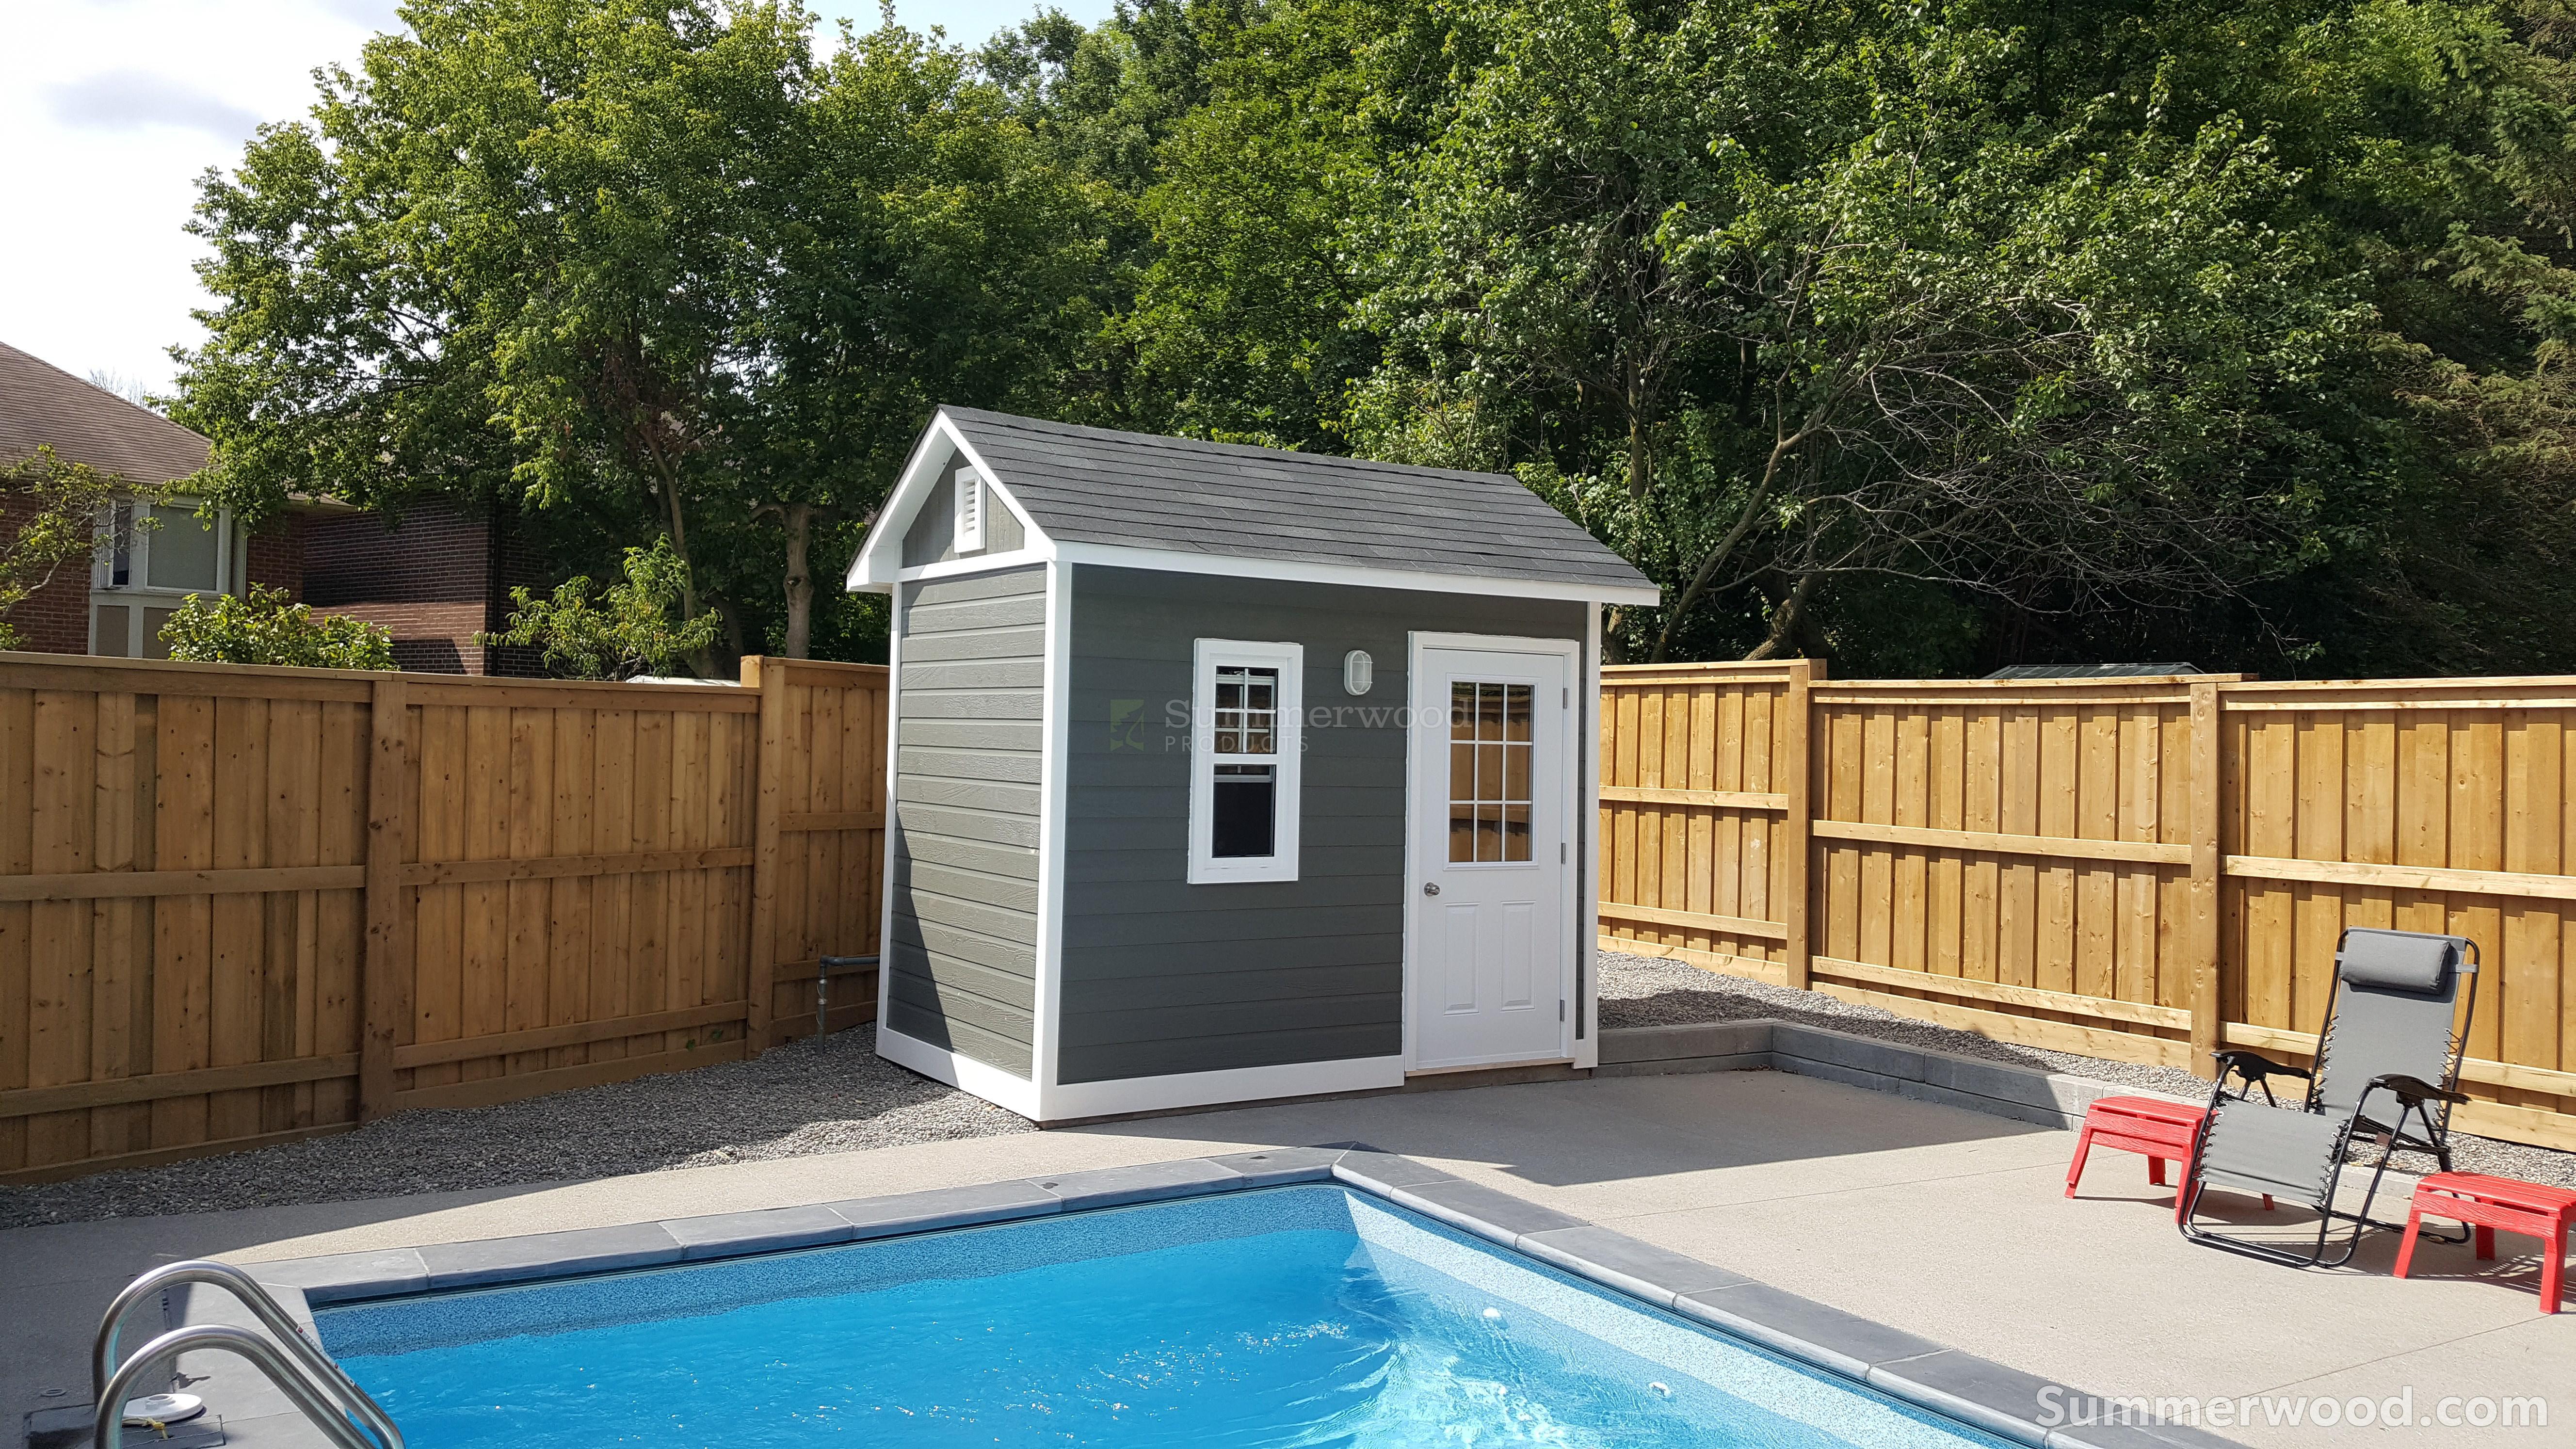 Canexel Palmerston 6x10 pool house with single hung window in Woodbridge, ON. ID number 217743-1